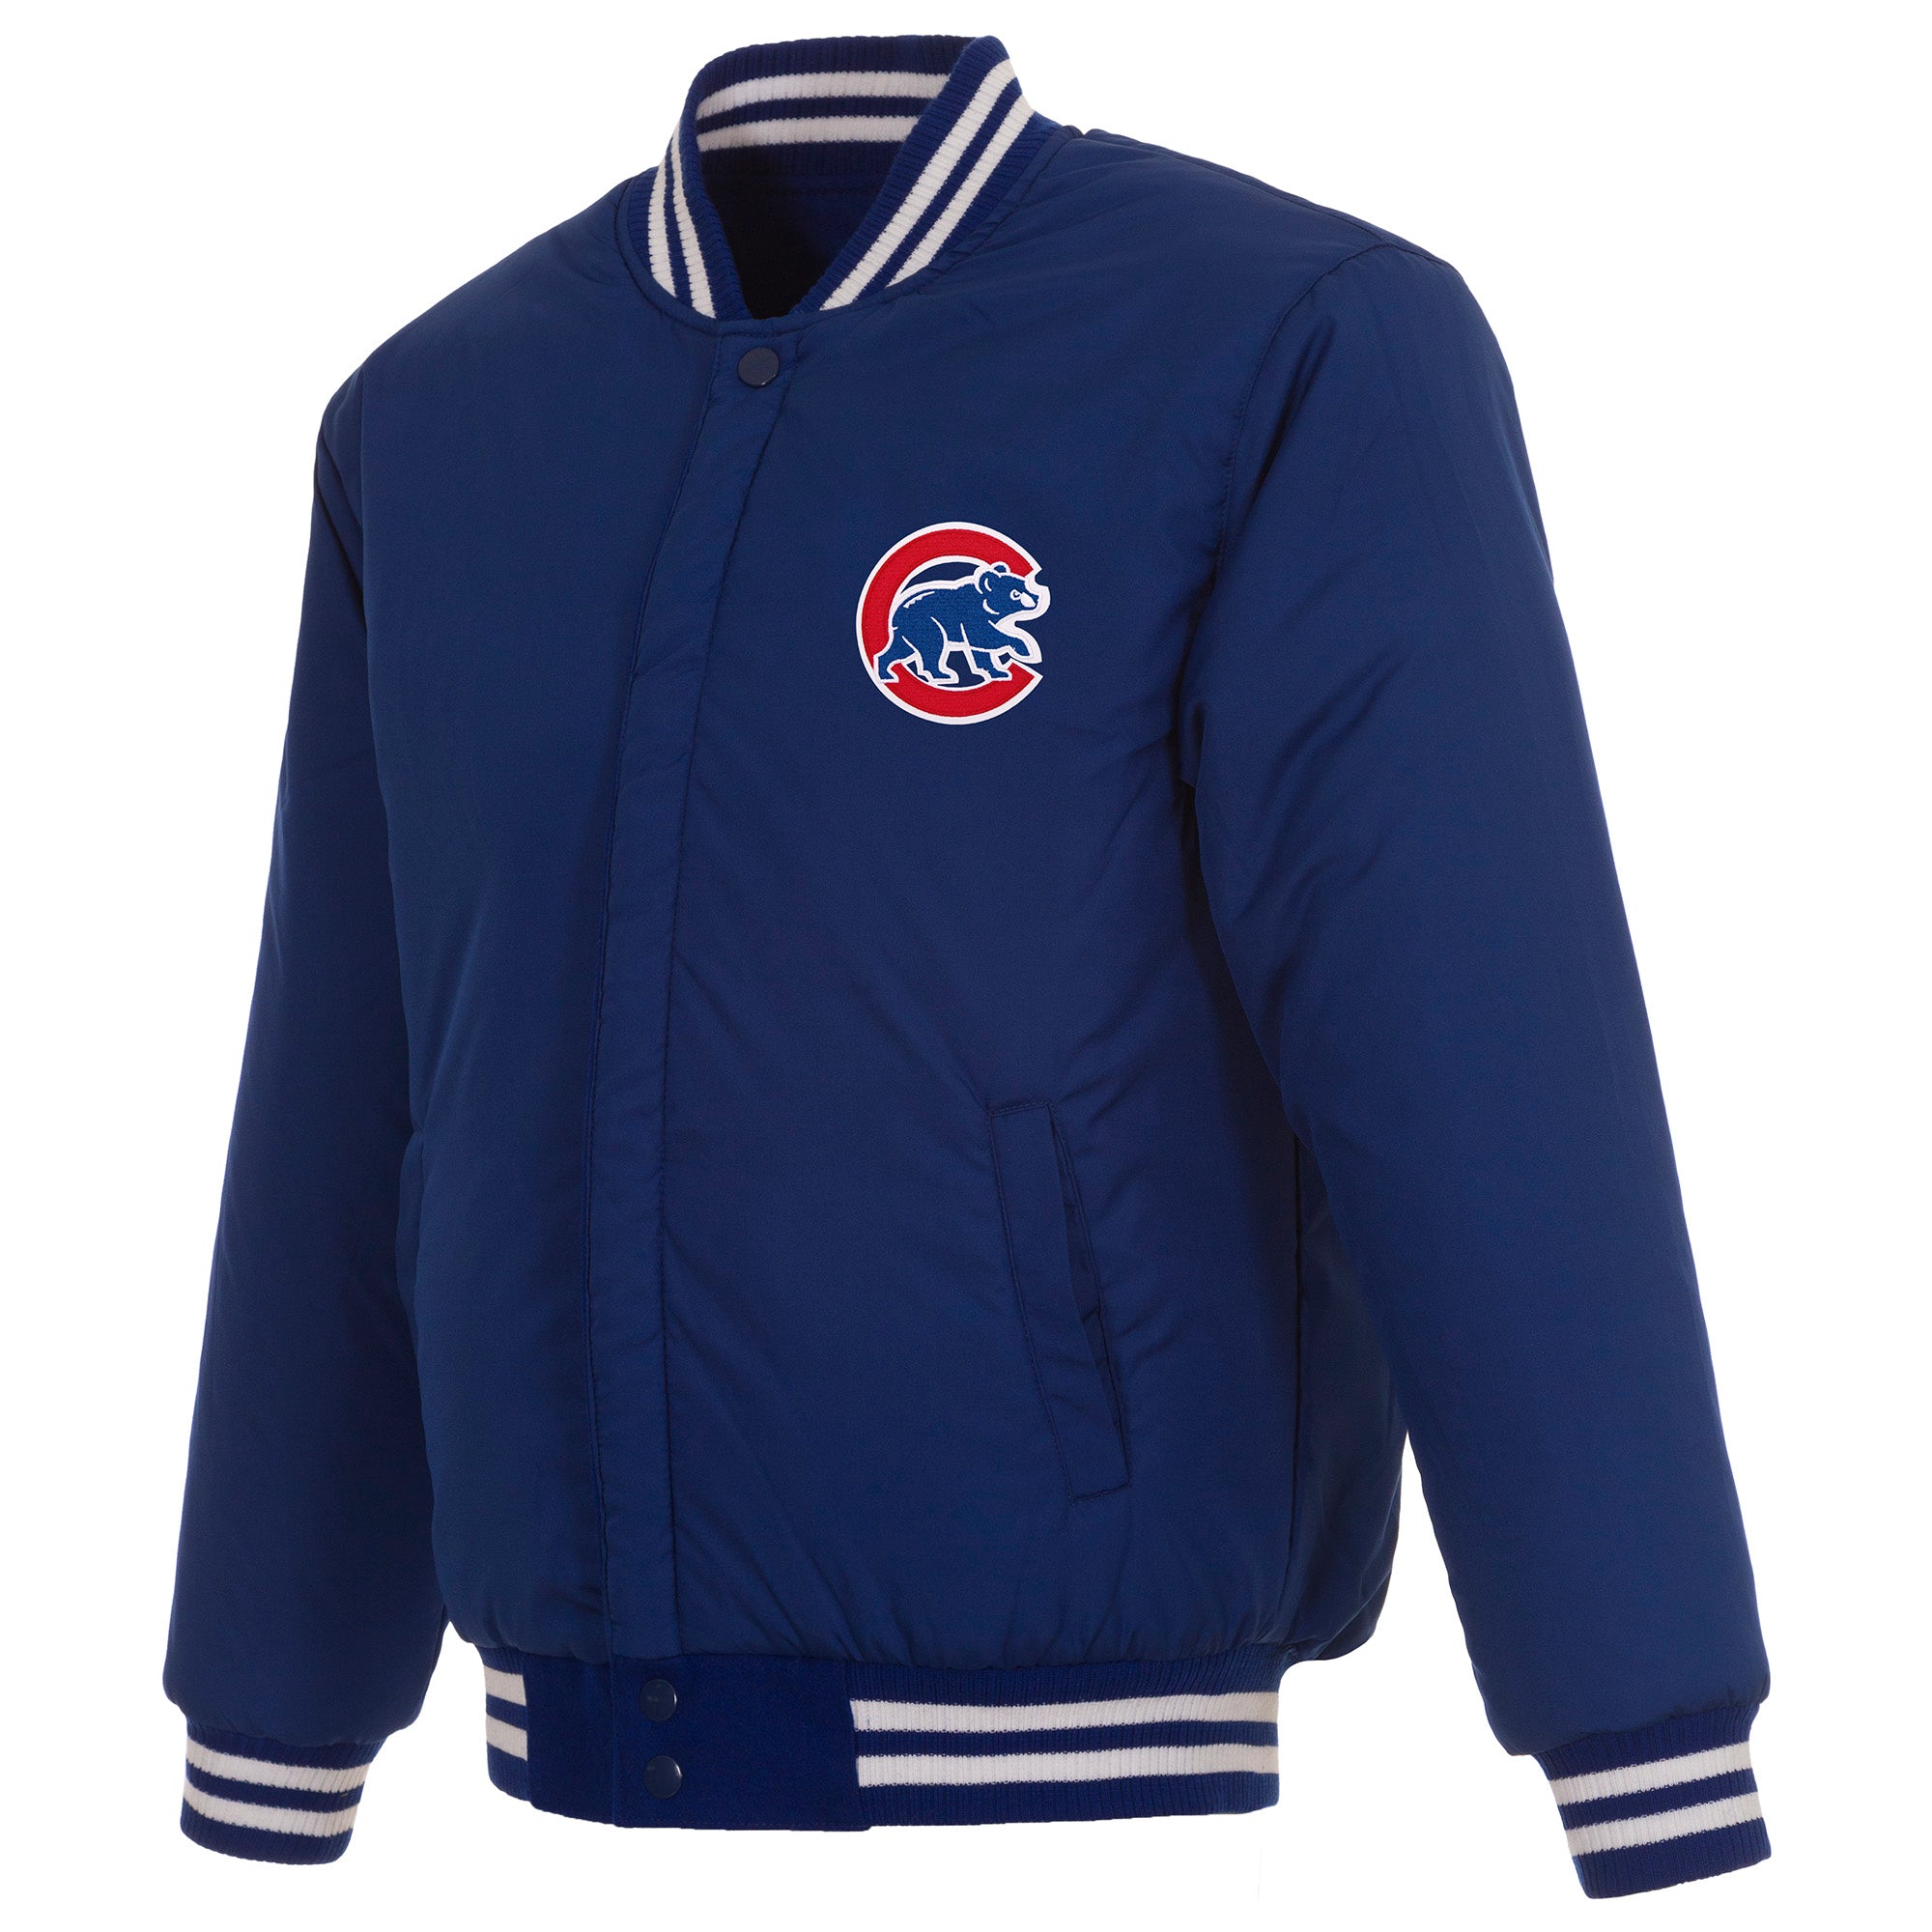 Chicago Cubs Reversible Wool Jacket - Royal Blue | J.H. Sports Jackets